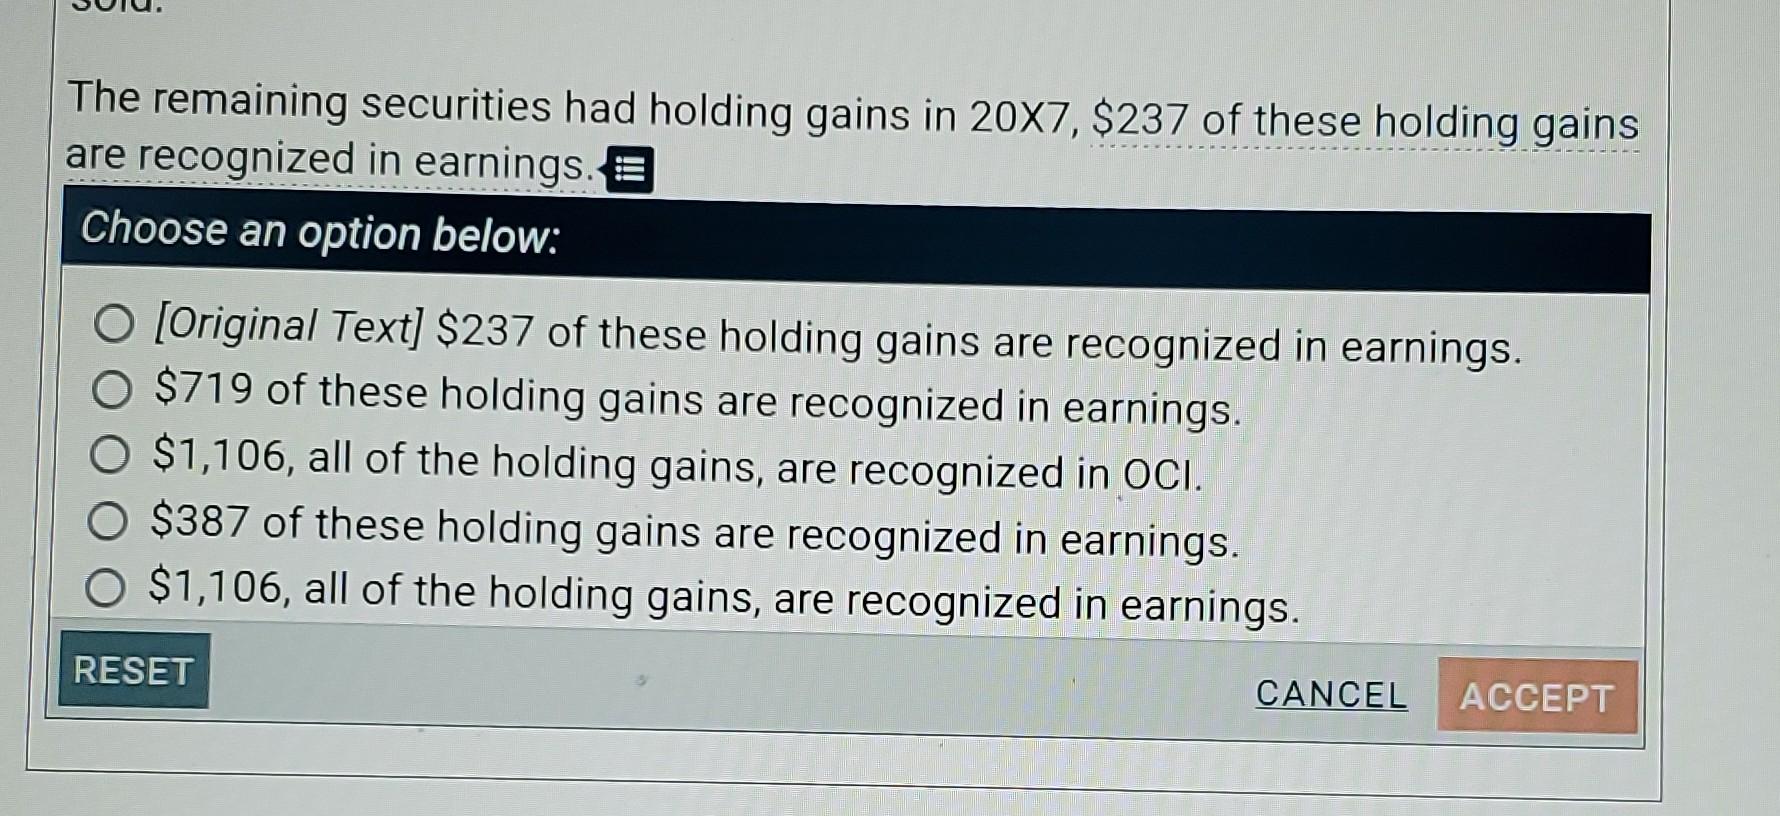 The remaining securities had holding gains in 20X7, $237 of these holding gains are recognized in earnings. <